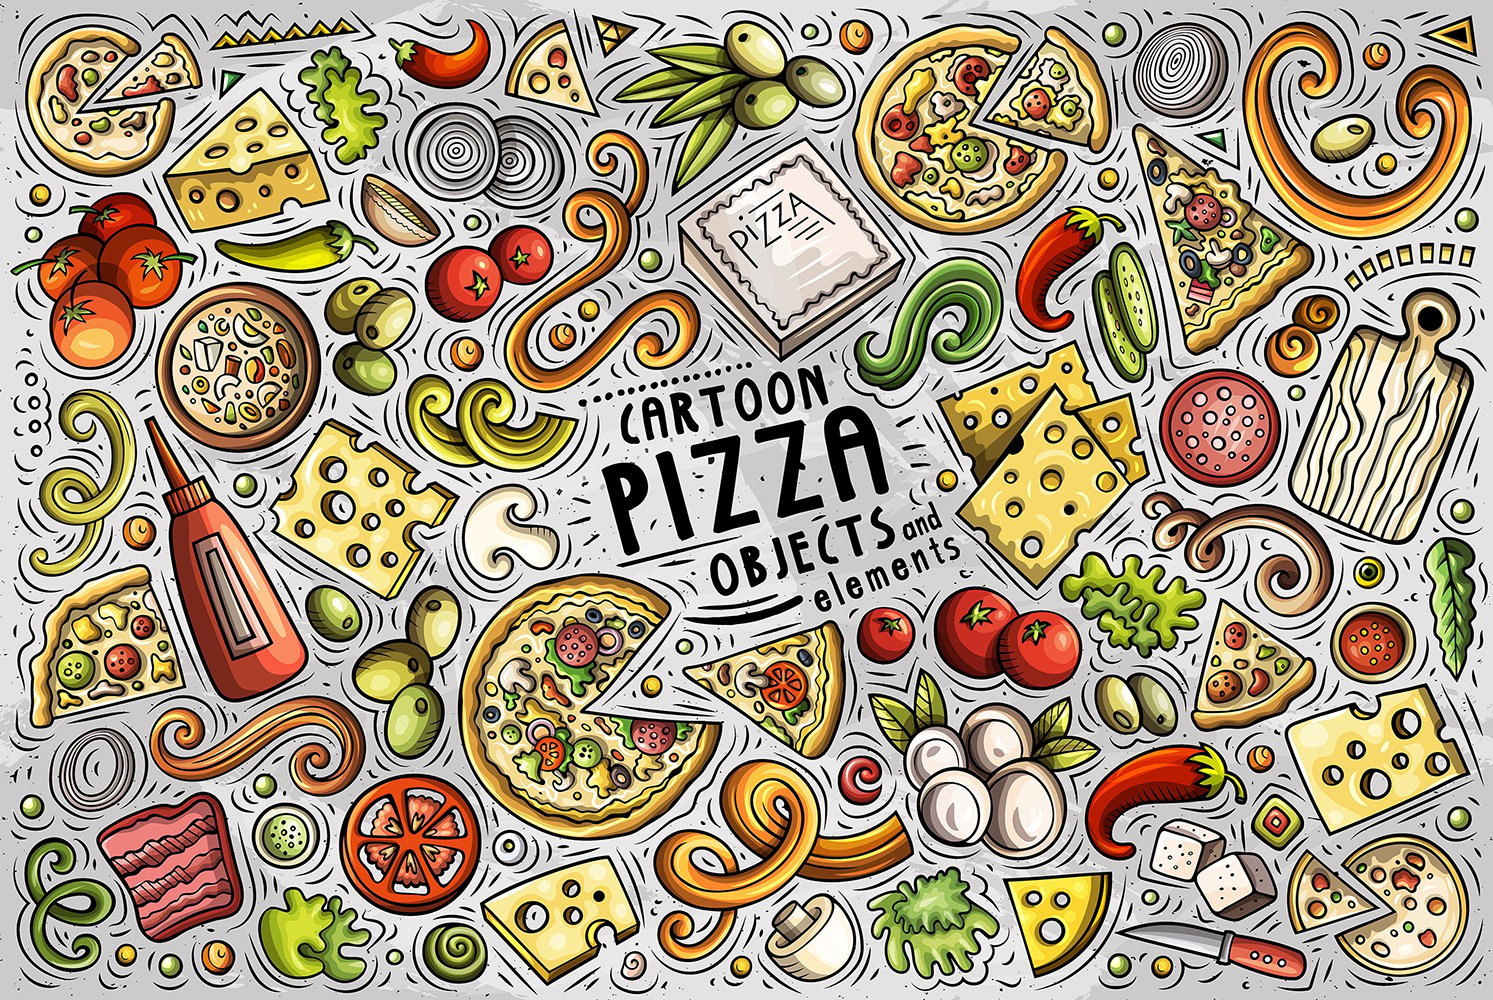 Pizza Cartoon Doodle Objects Set - Vector Image